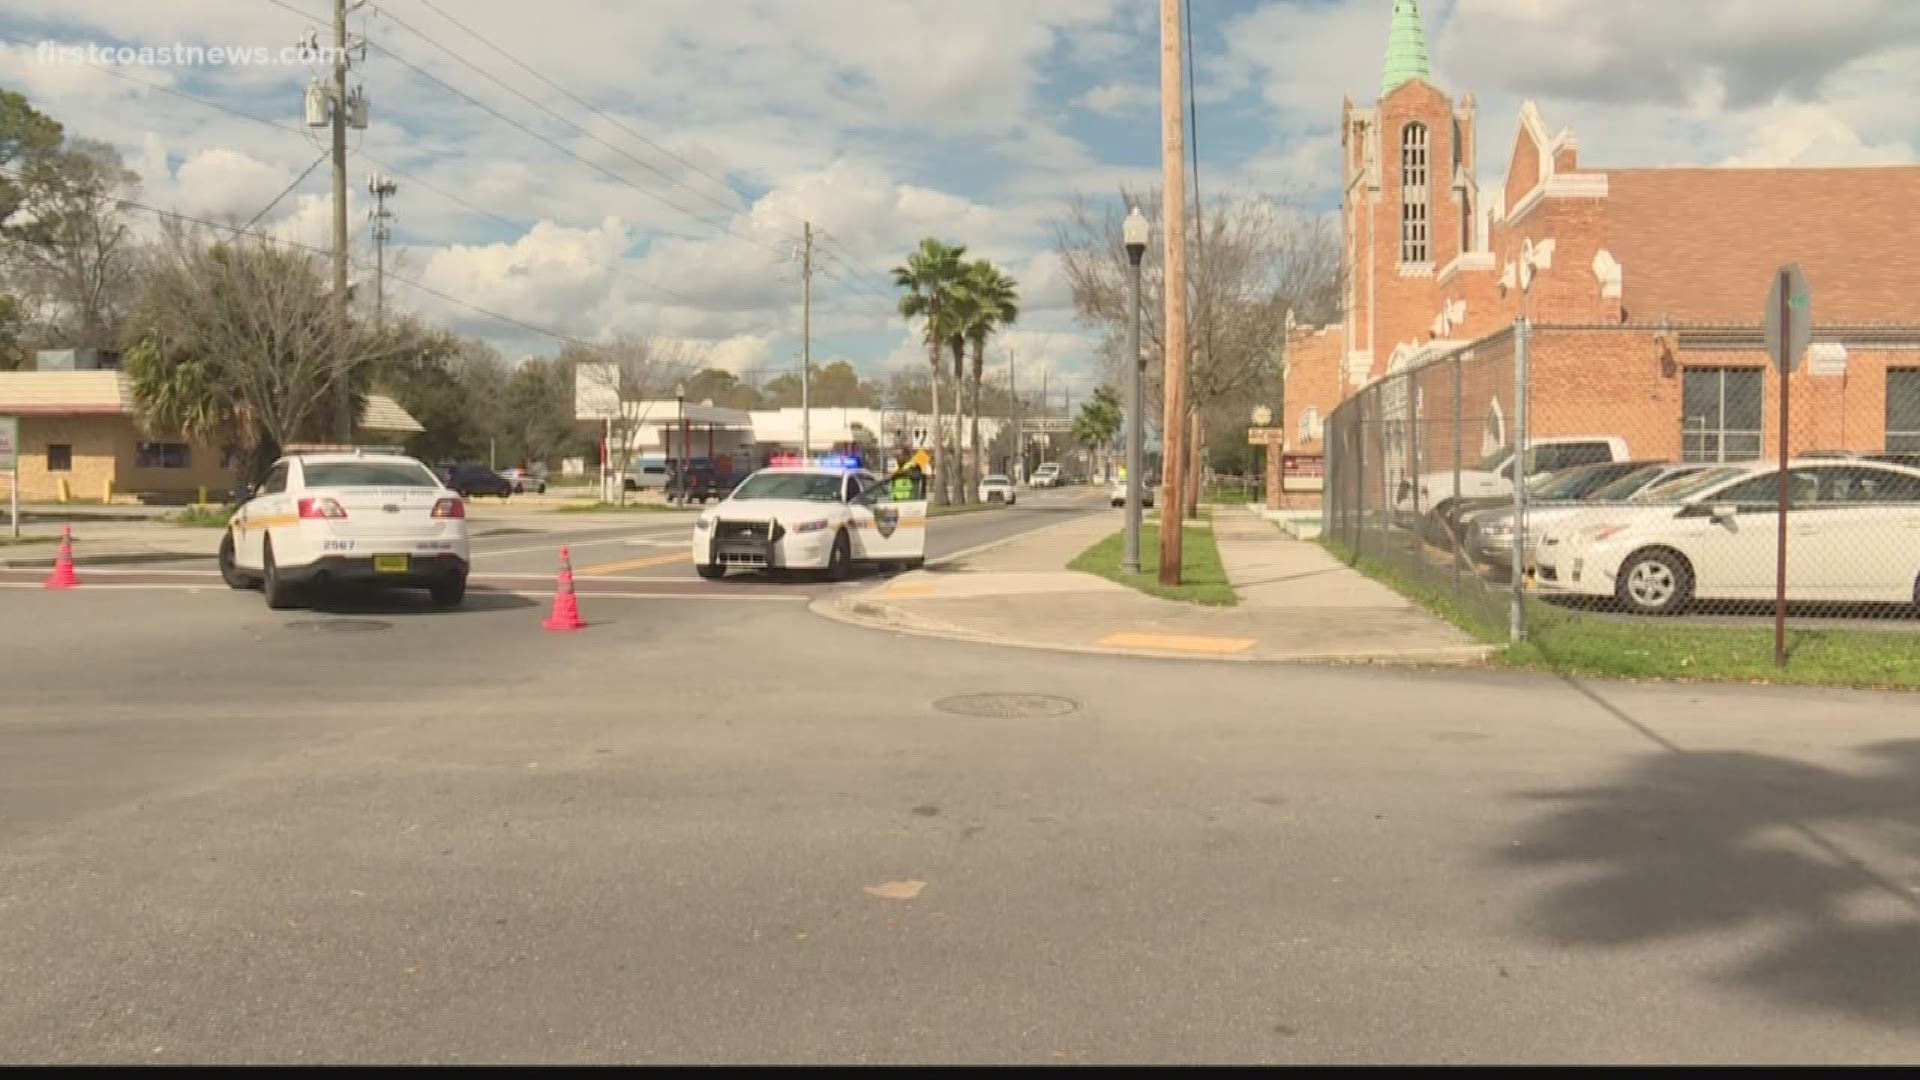 28th homicide recorded in Jacksonville in 2019 after 3 shootings occur